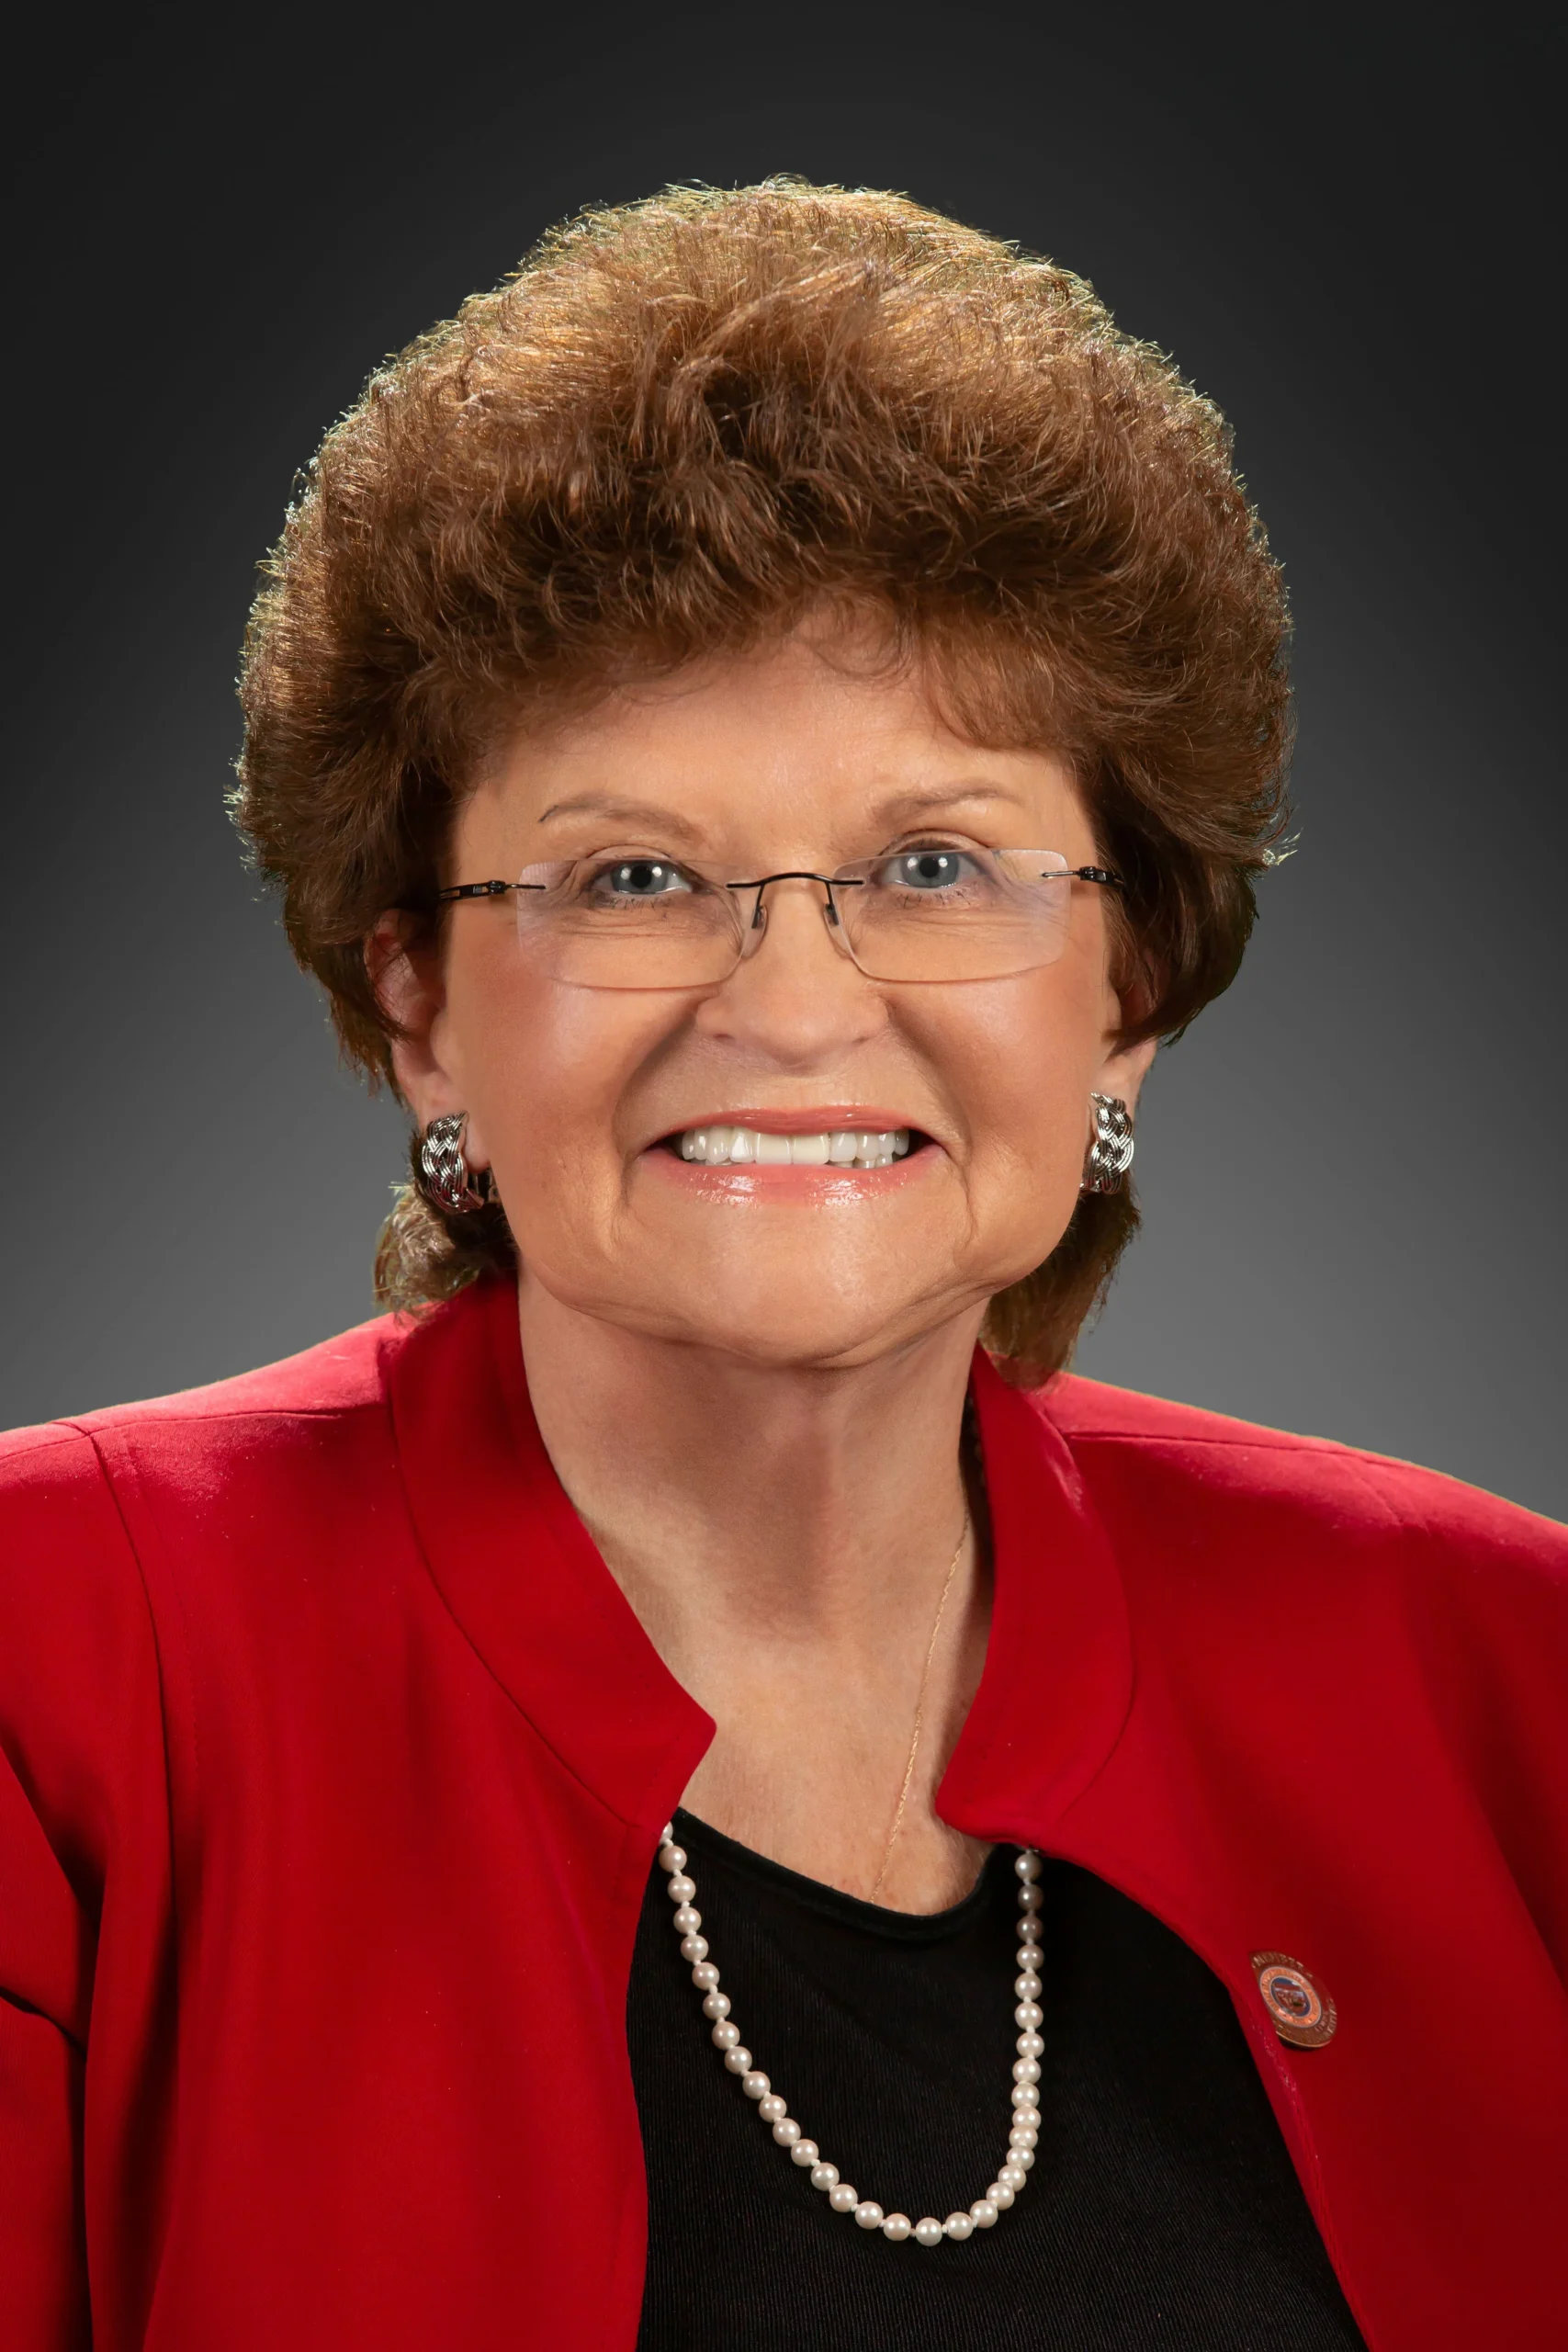 Arizona State Rep. Gail Griffin to speak at EAC’s Constitution Day celebration